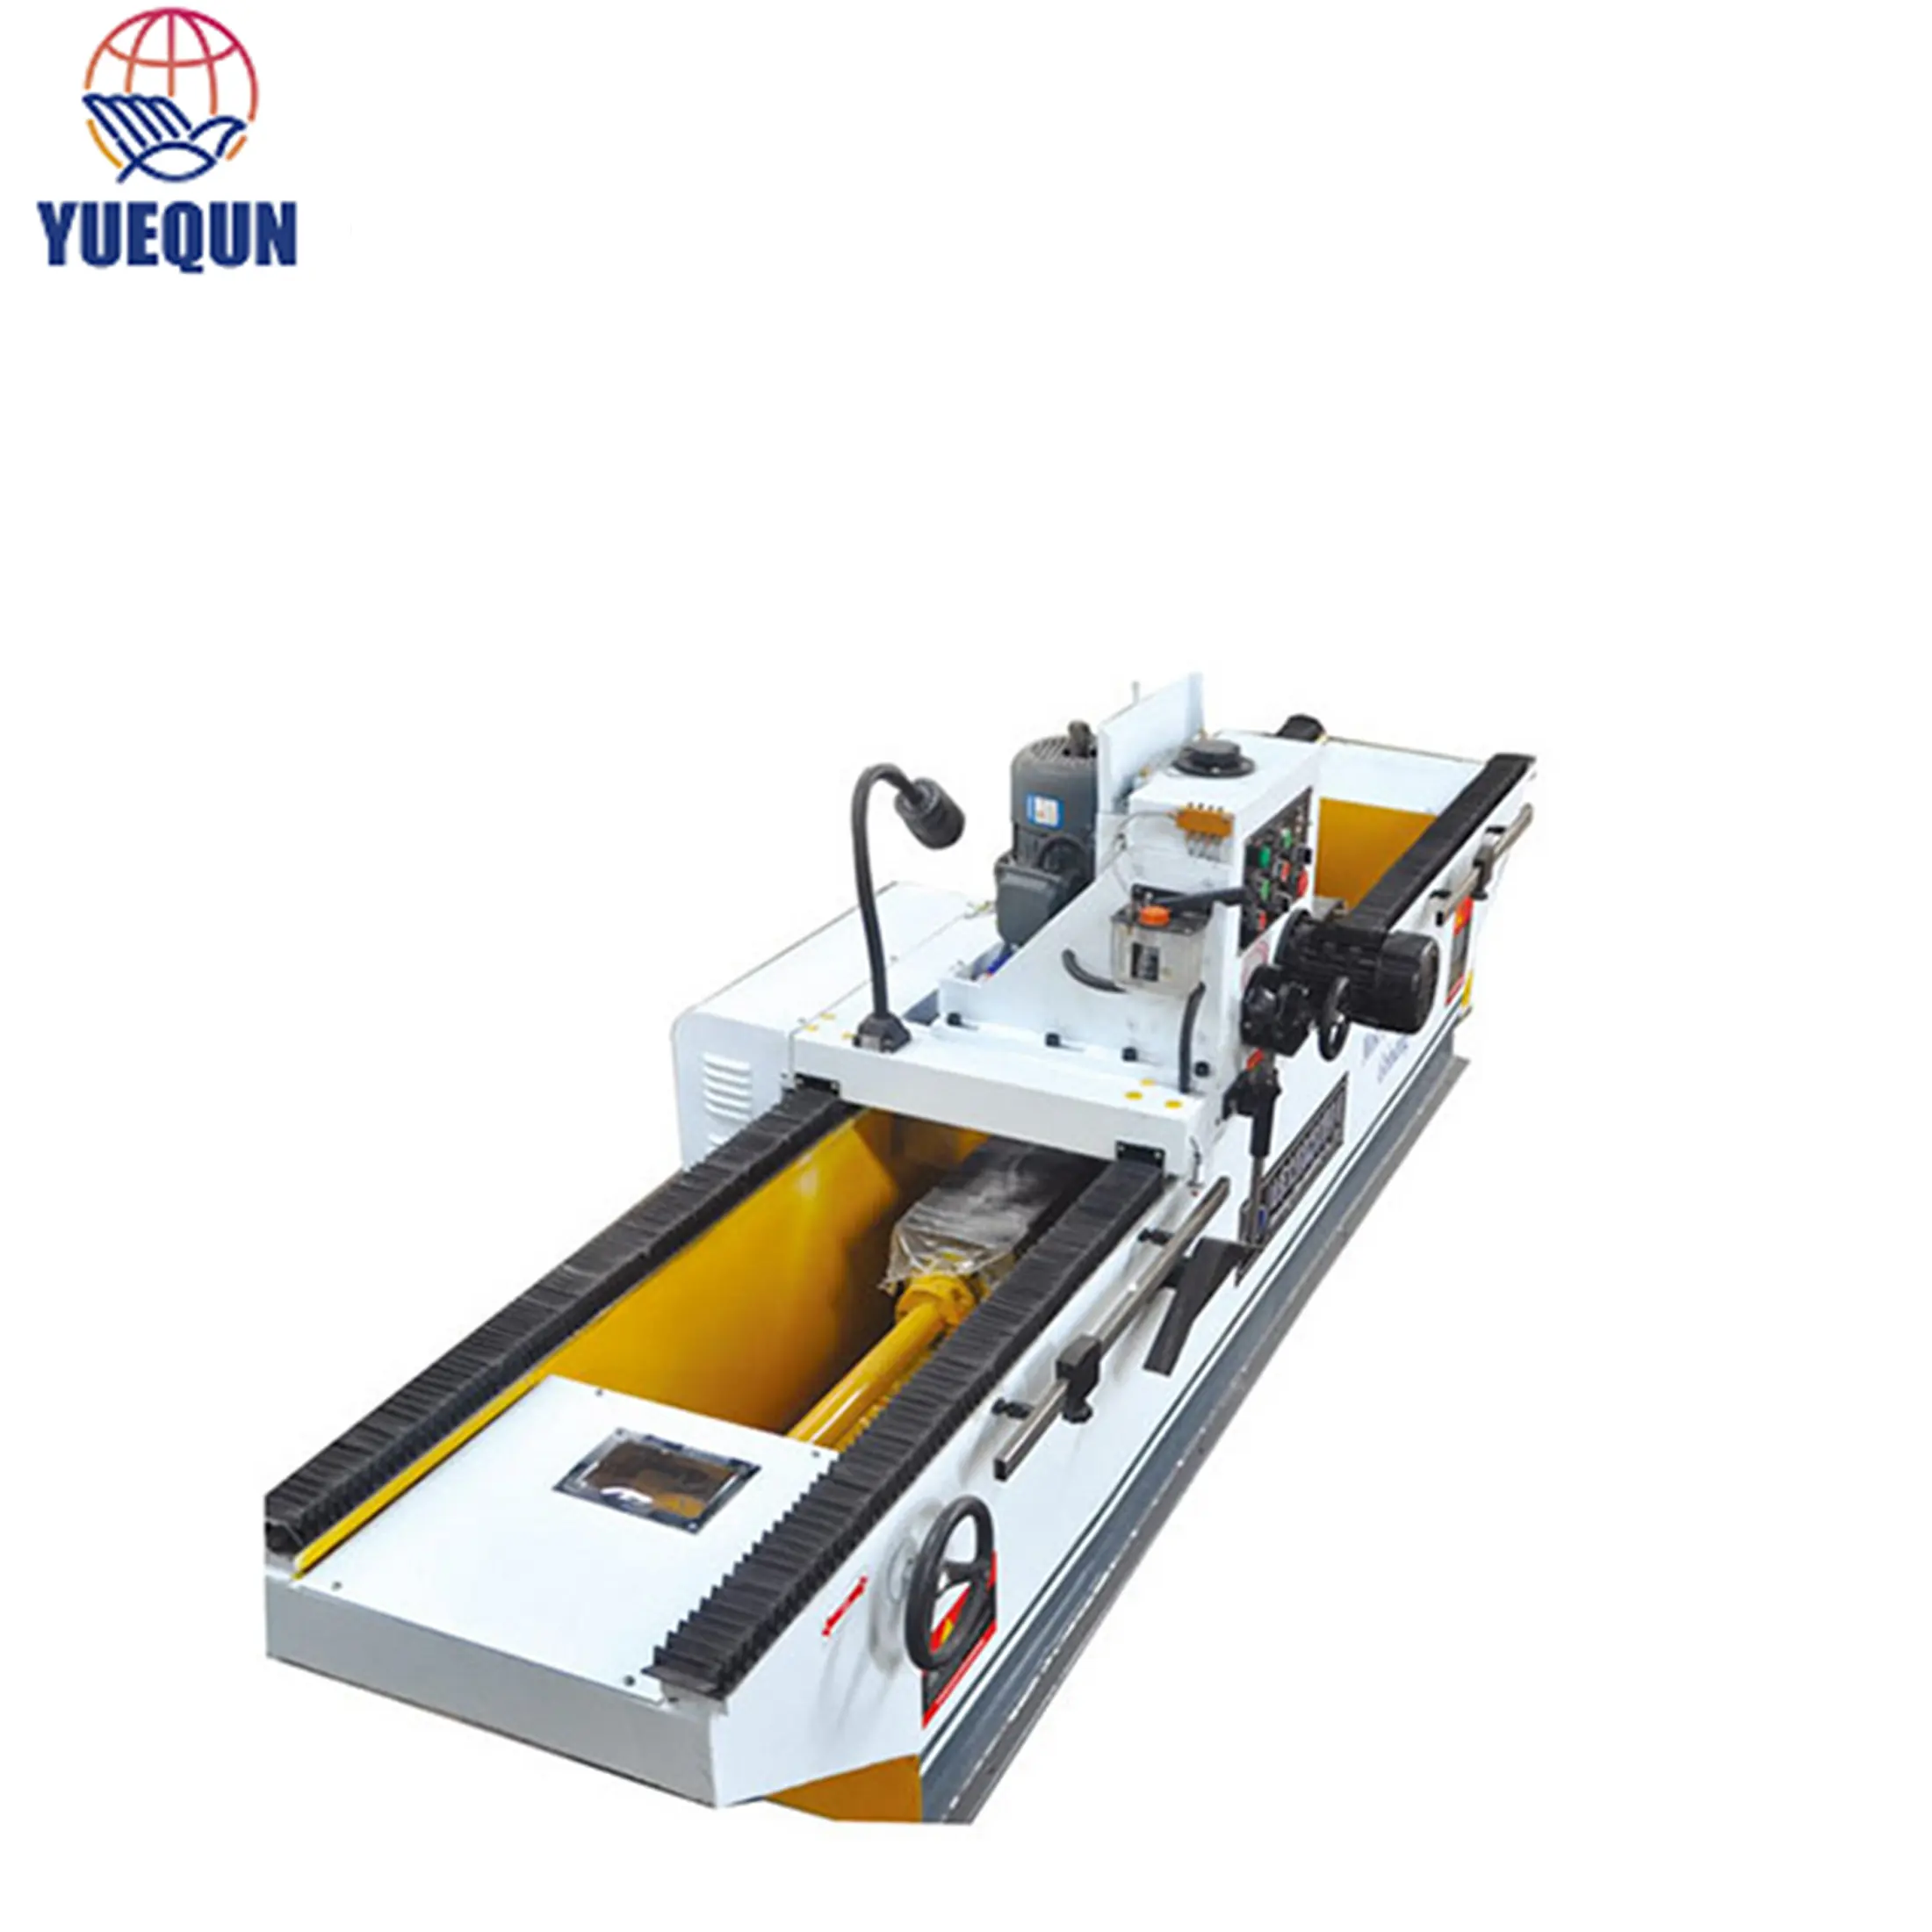 2020 New Commercial CNC Guillotine Blade Grinding Machine PLC Core Component 380 V/440 V 2-Year Warranty